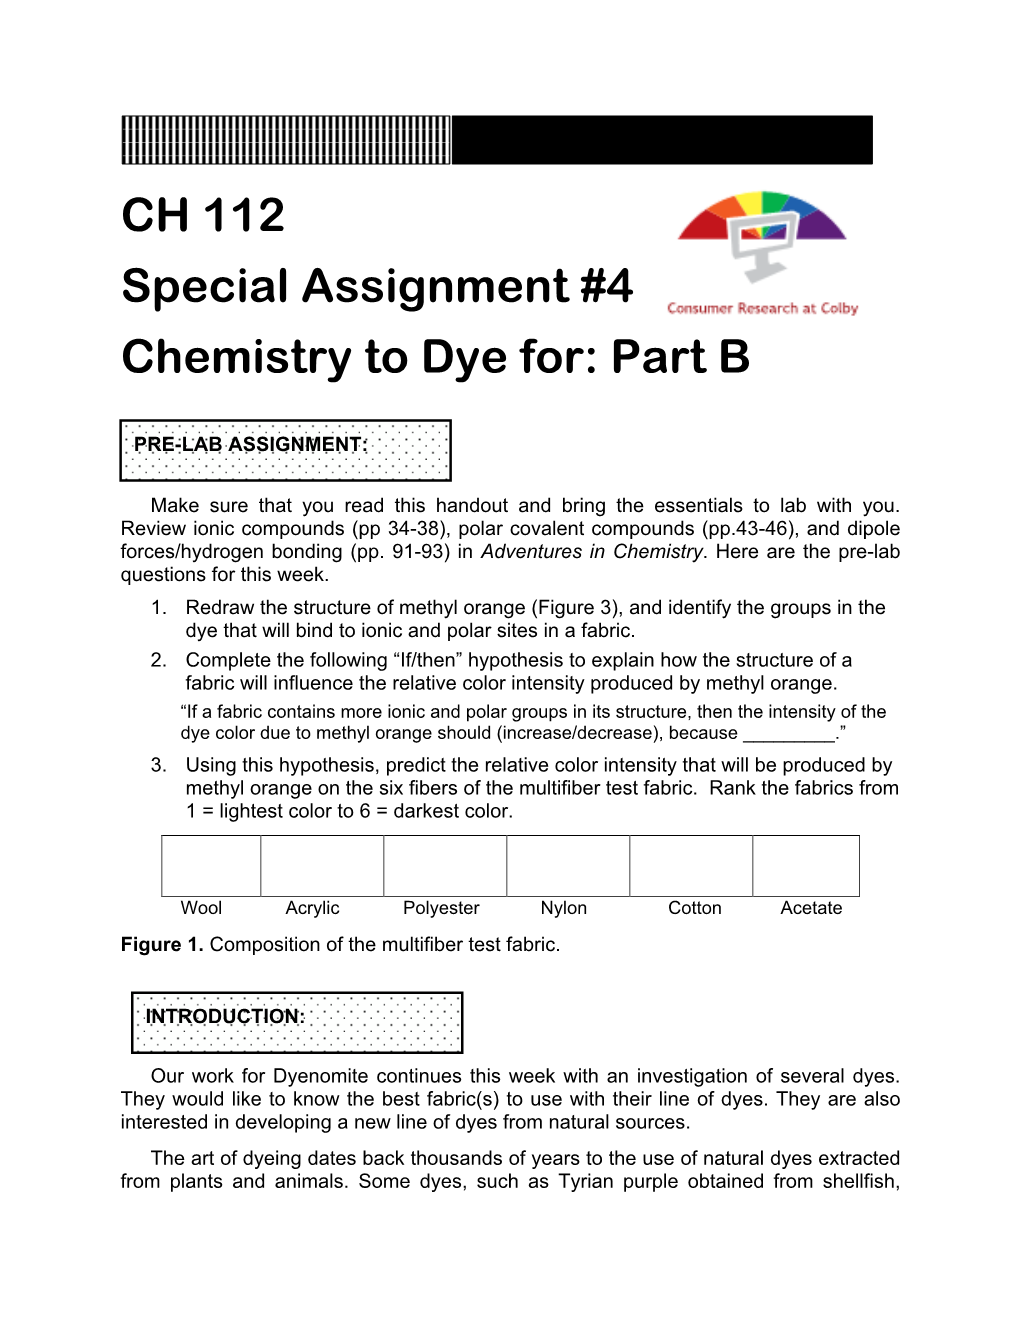 CH 112 Special Assignment #4 Chemistry to Dye For: Part B